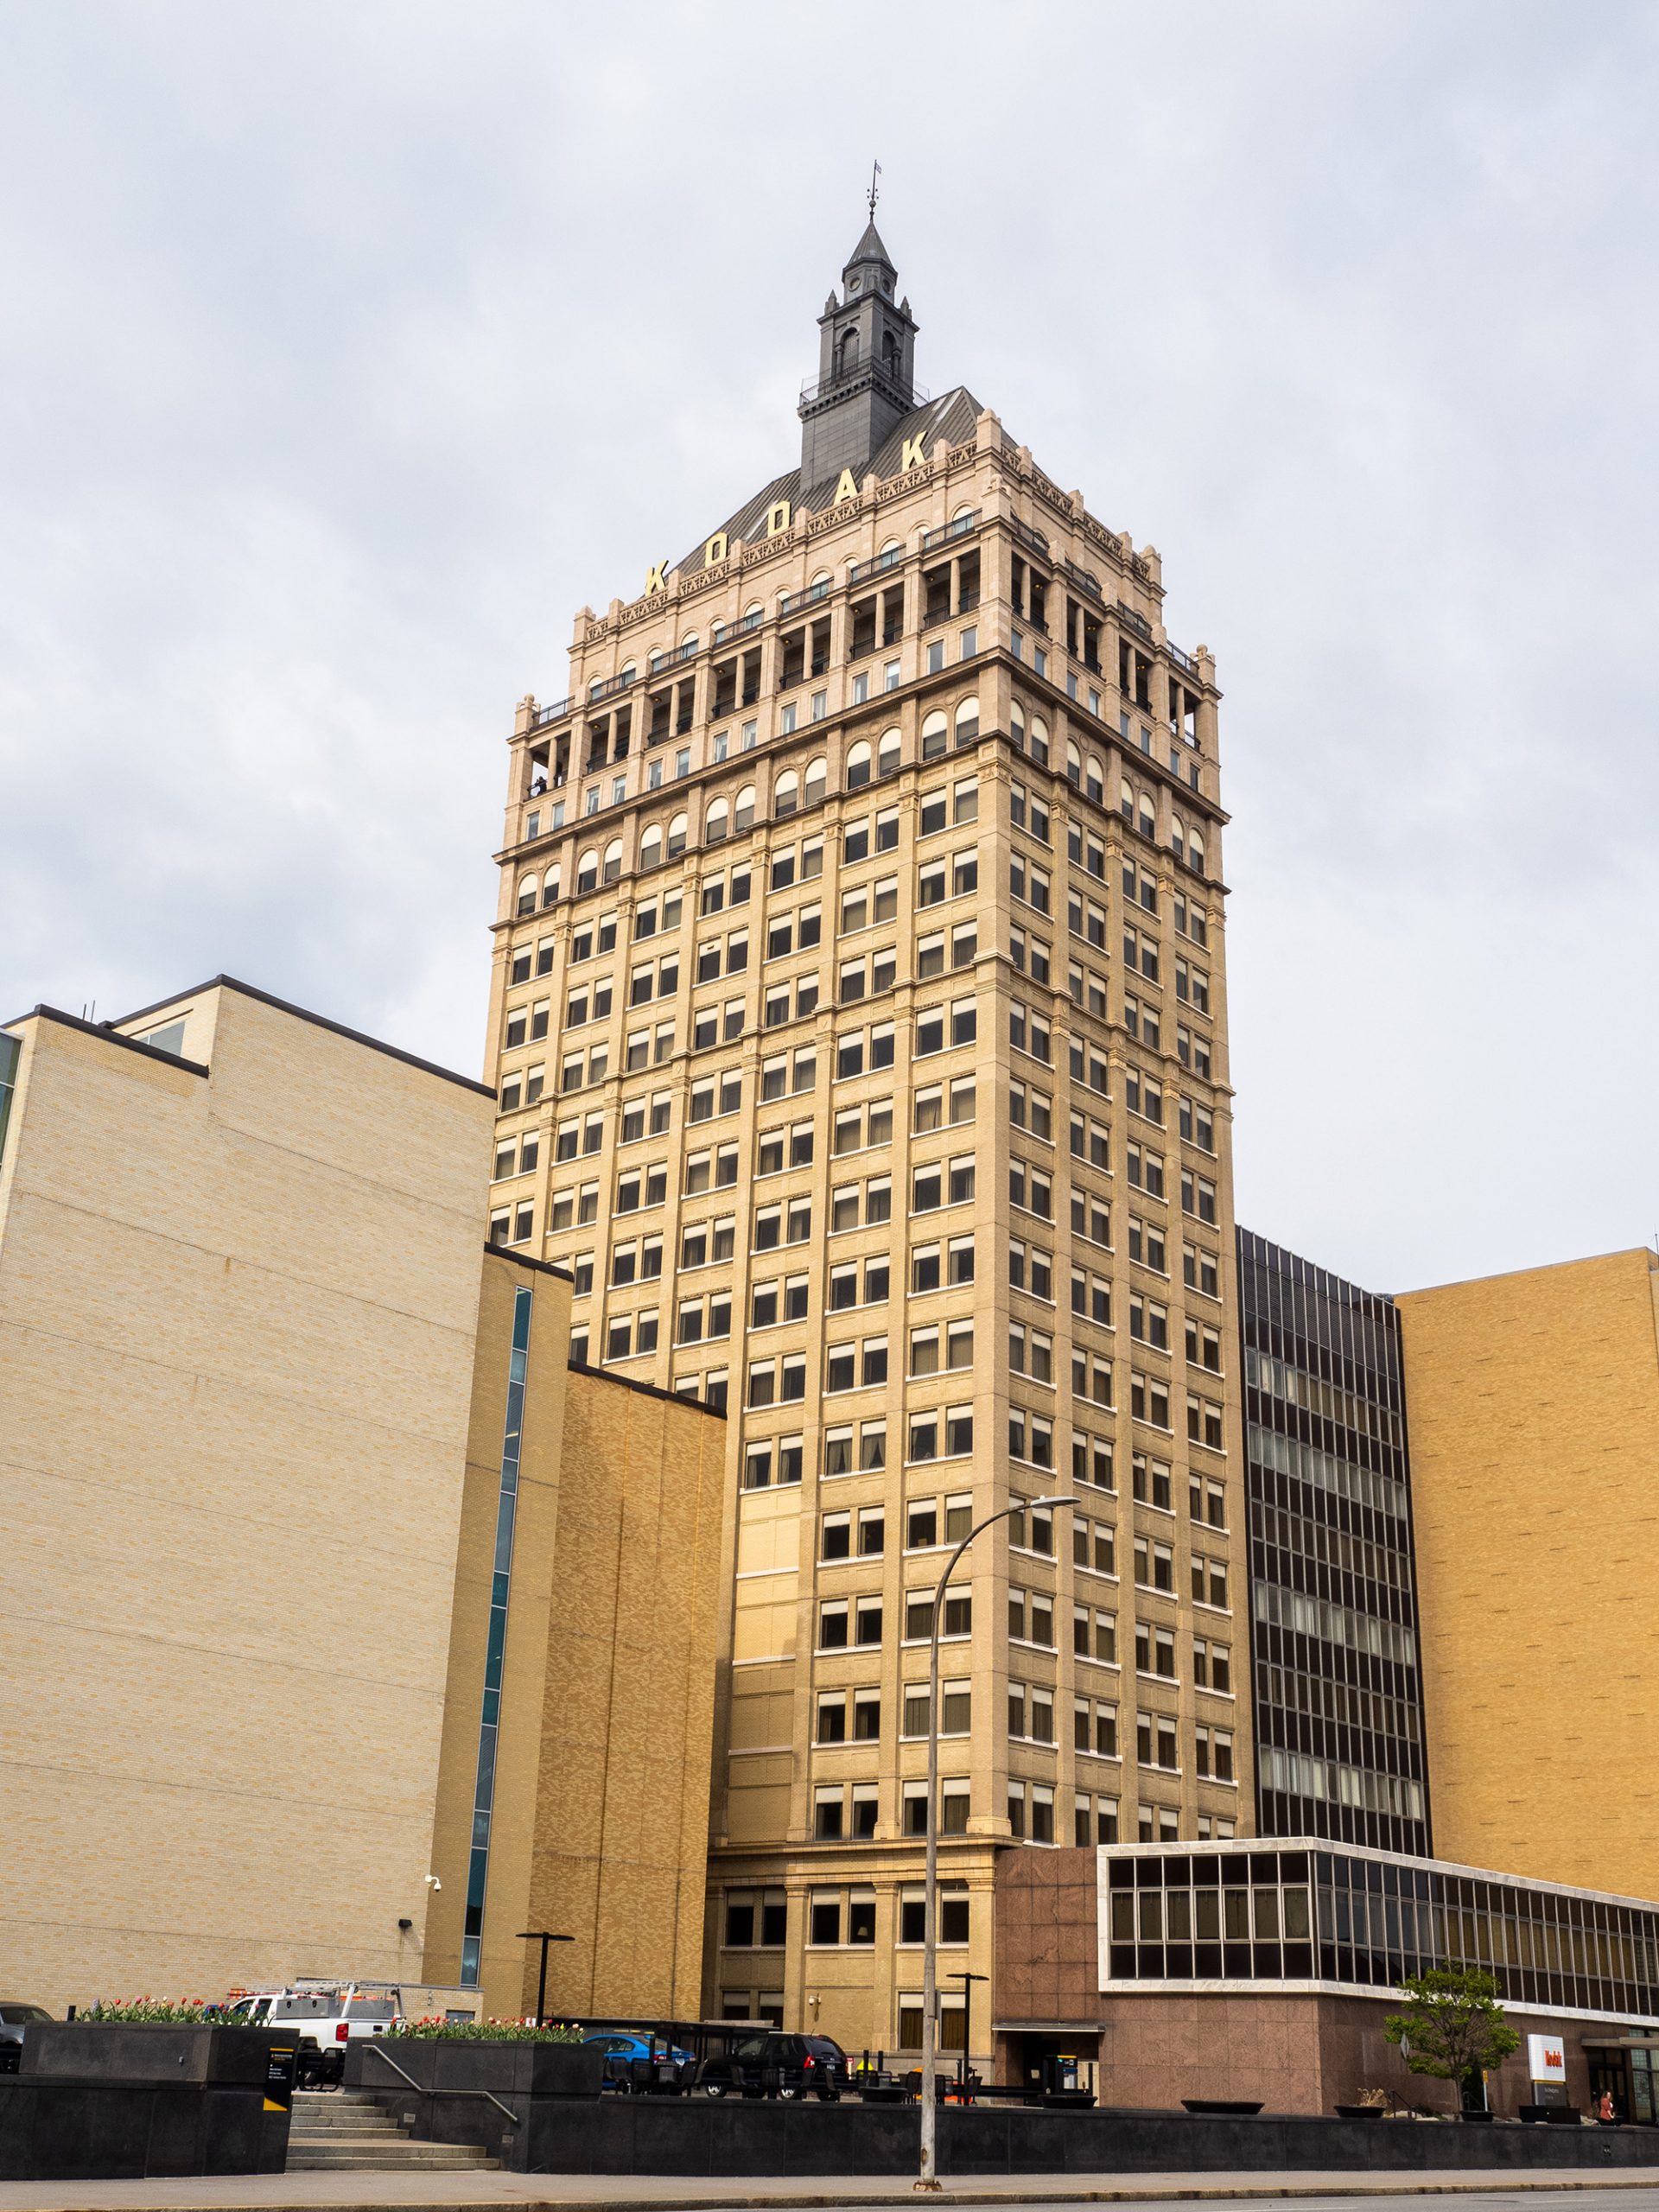 Standing on Platt Street, the Kodak Tower, a historic icon in Rochester, Upstate New York State, stretches towards the sky.